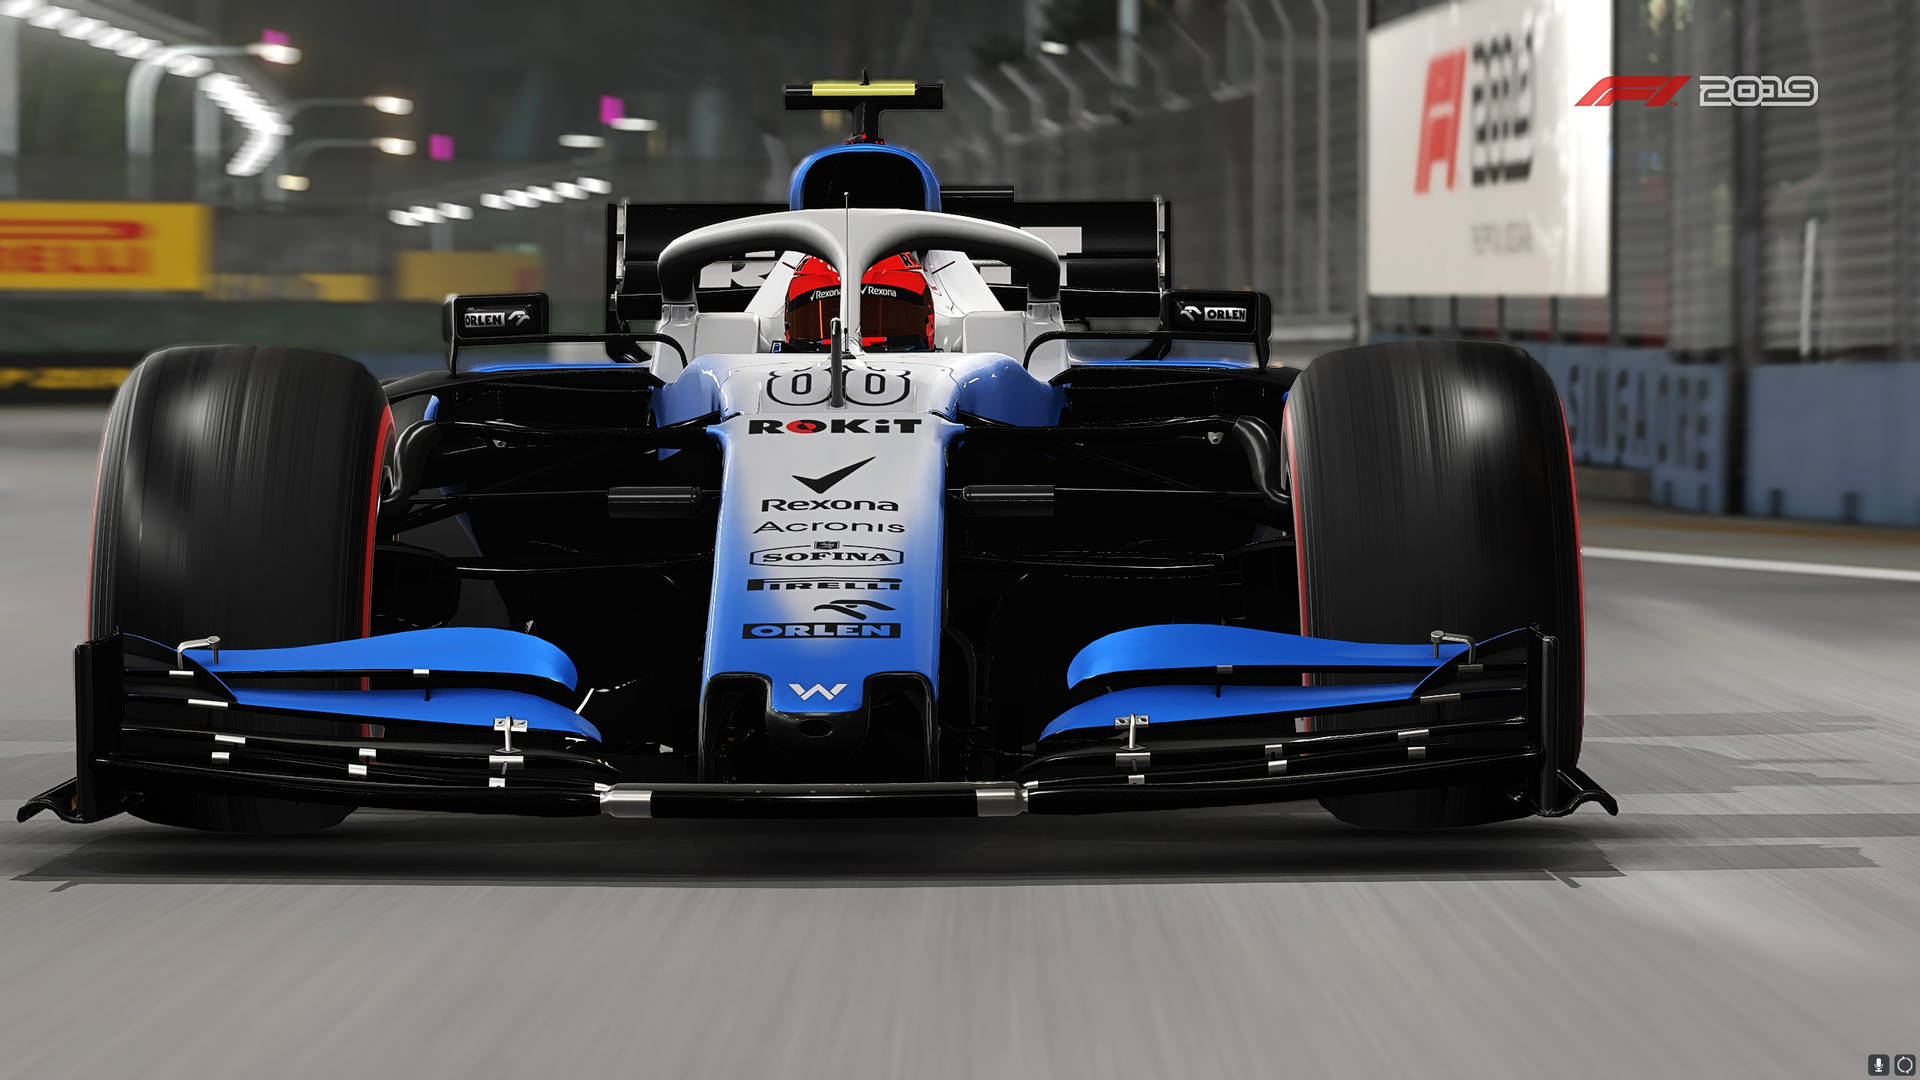 Williams Racing In F1 2019 Background